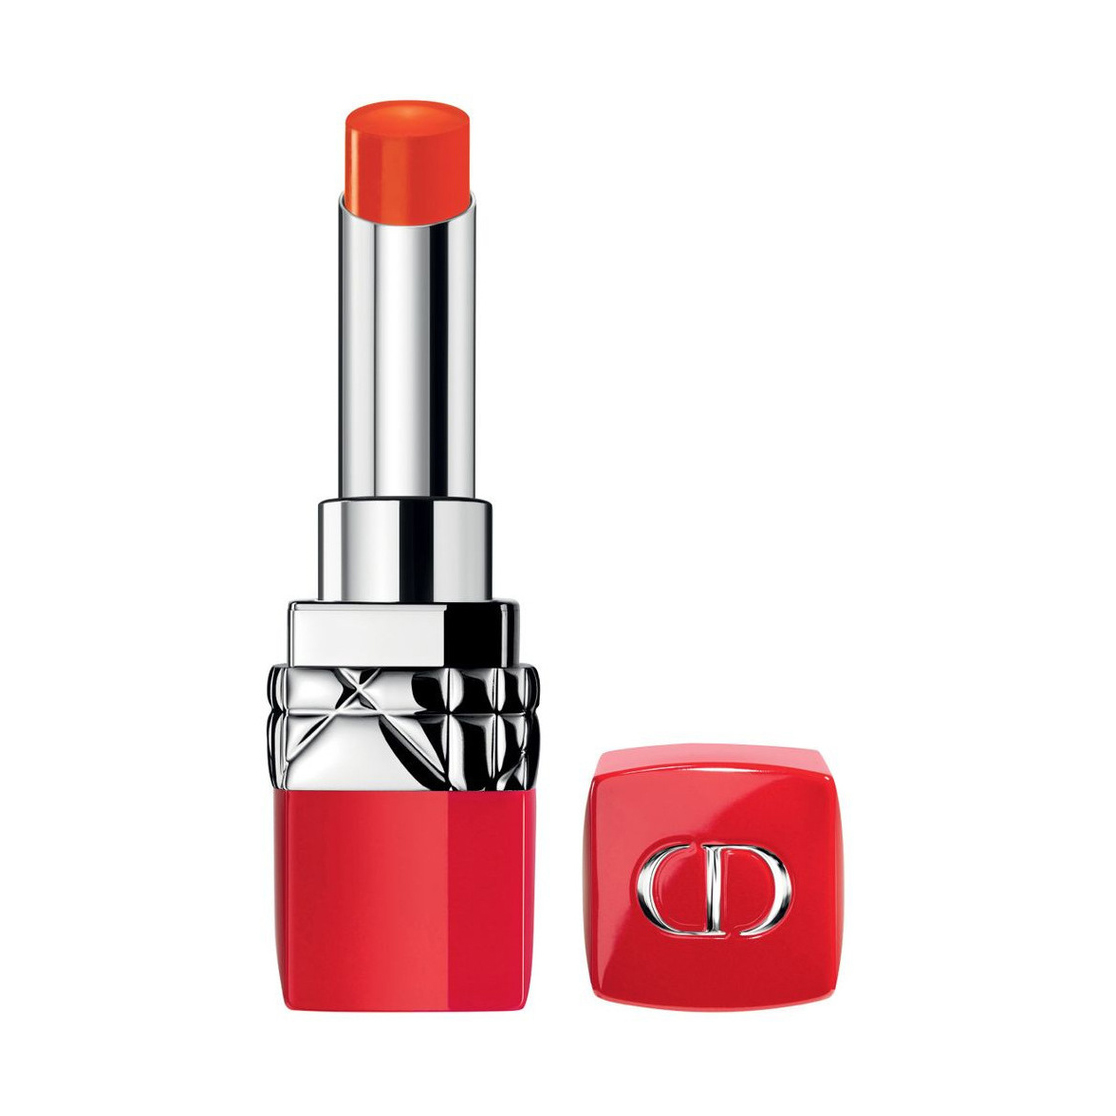 Dior Ultra Rouge Lipstick in Ultra Mad, $56, available at myer.com.au